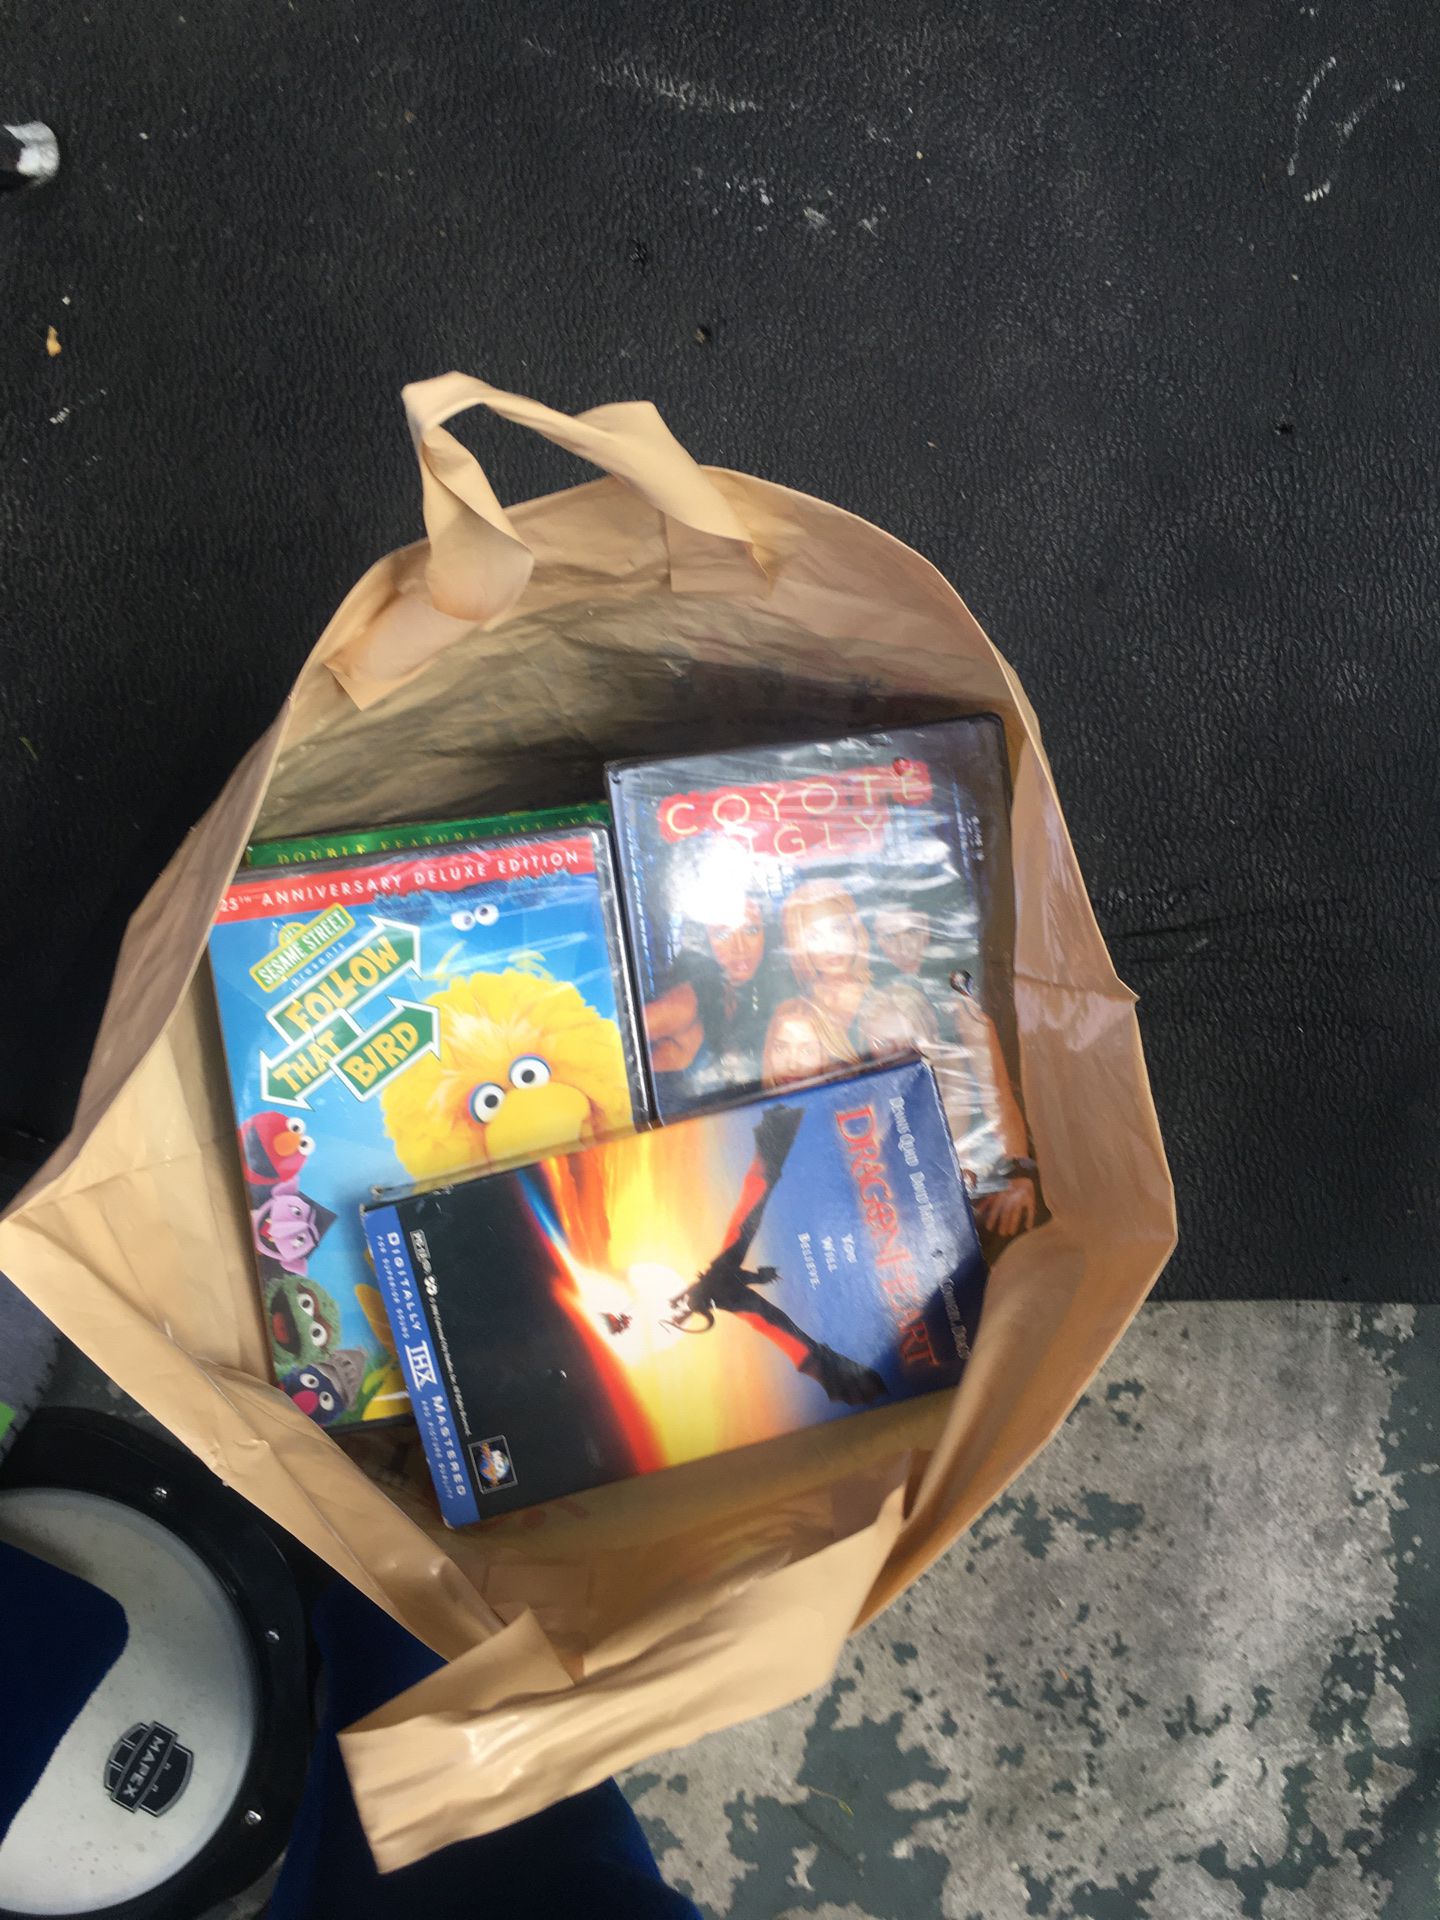 Movies (not free!)